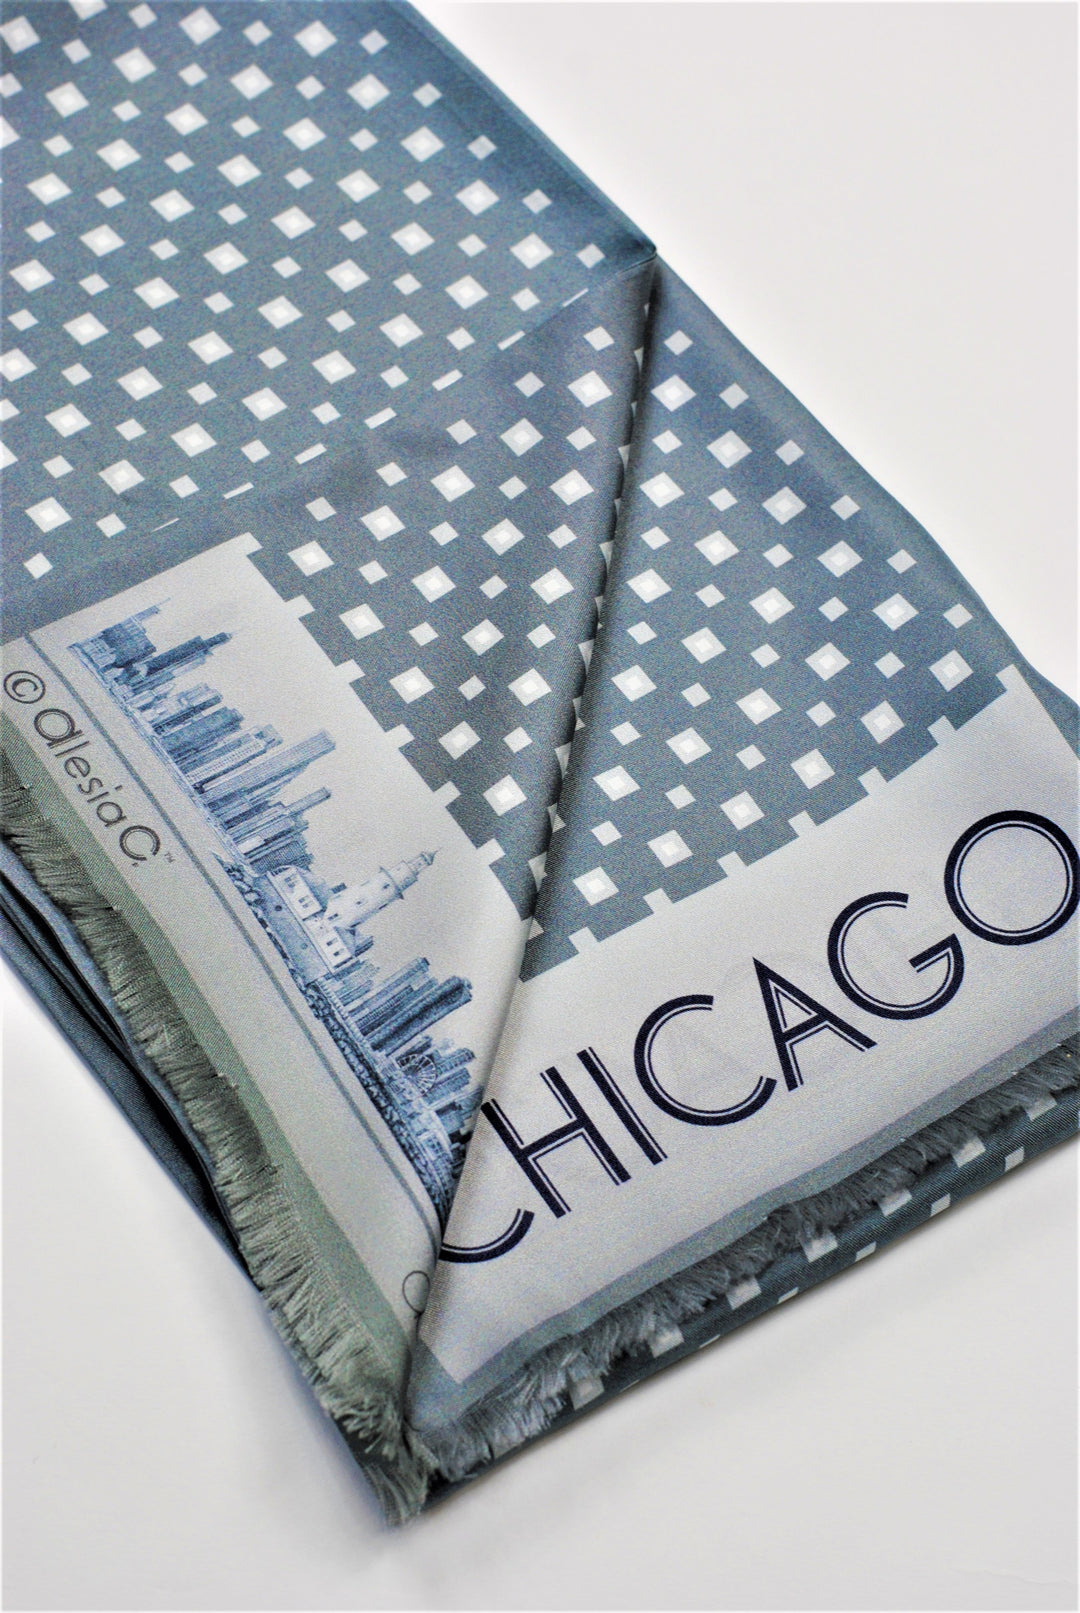 CHICAGO Skyline Art Pure Double Sided Silk Scarf Gray White